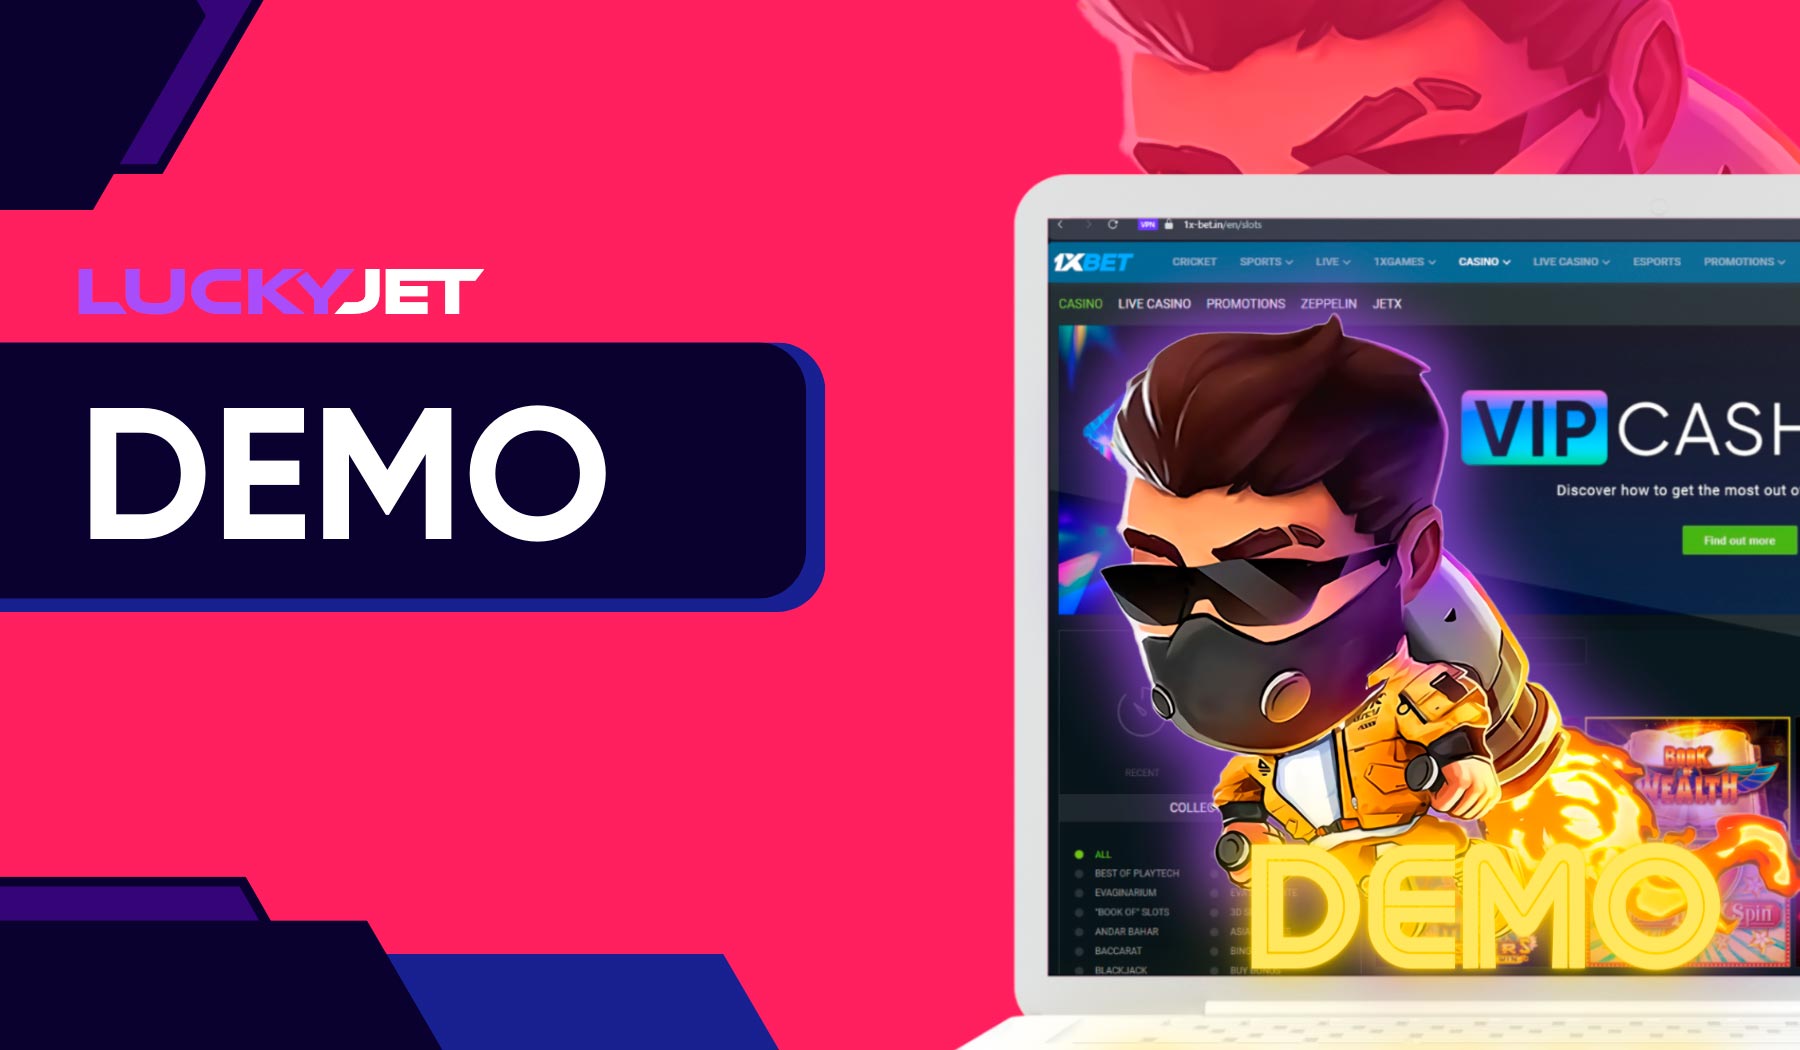 Lucky Jet demo game from 1xbet introduces the game without spending money